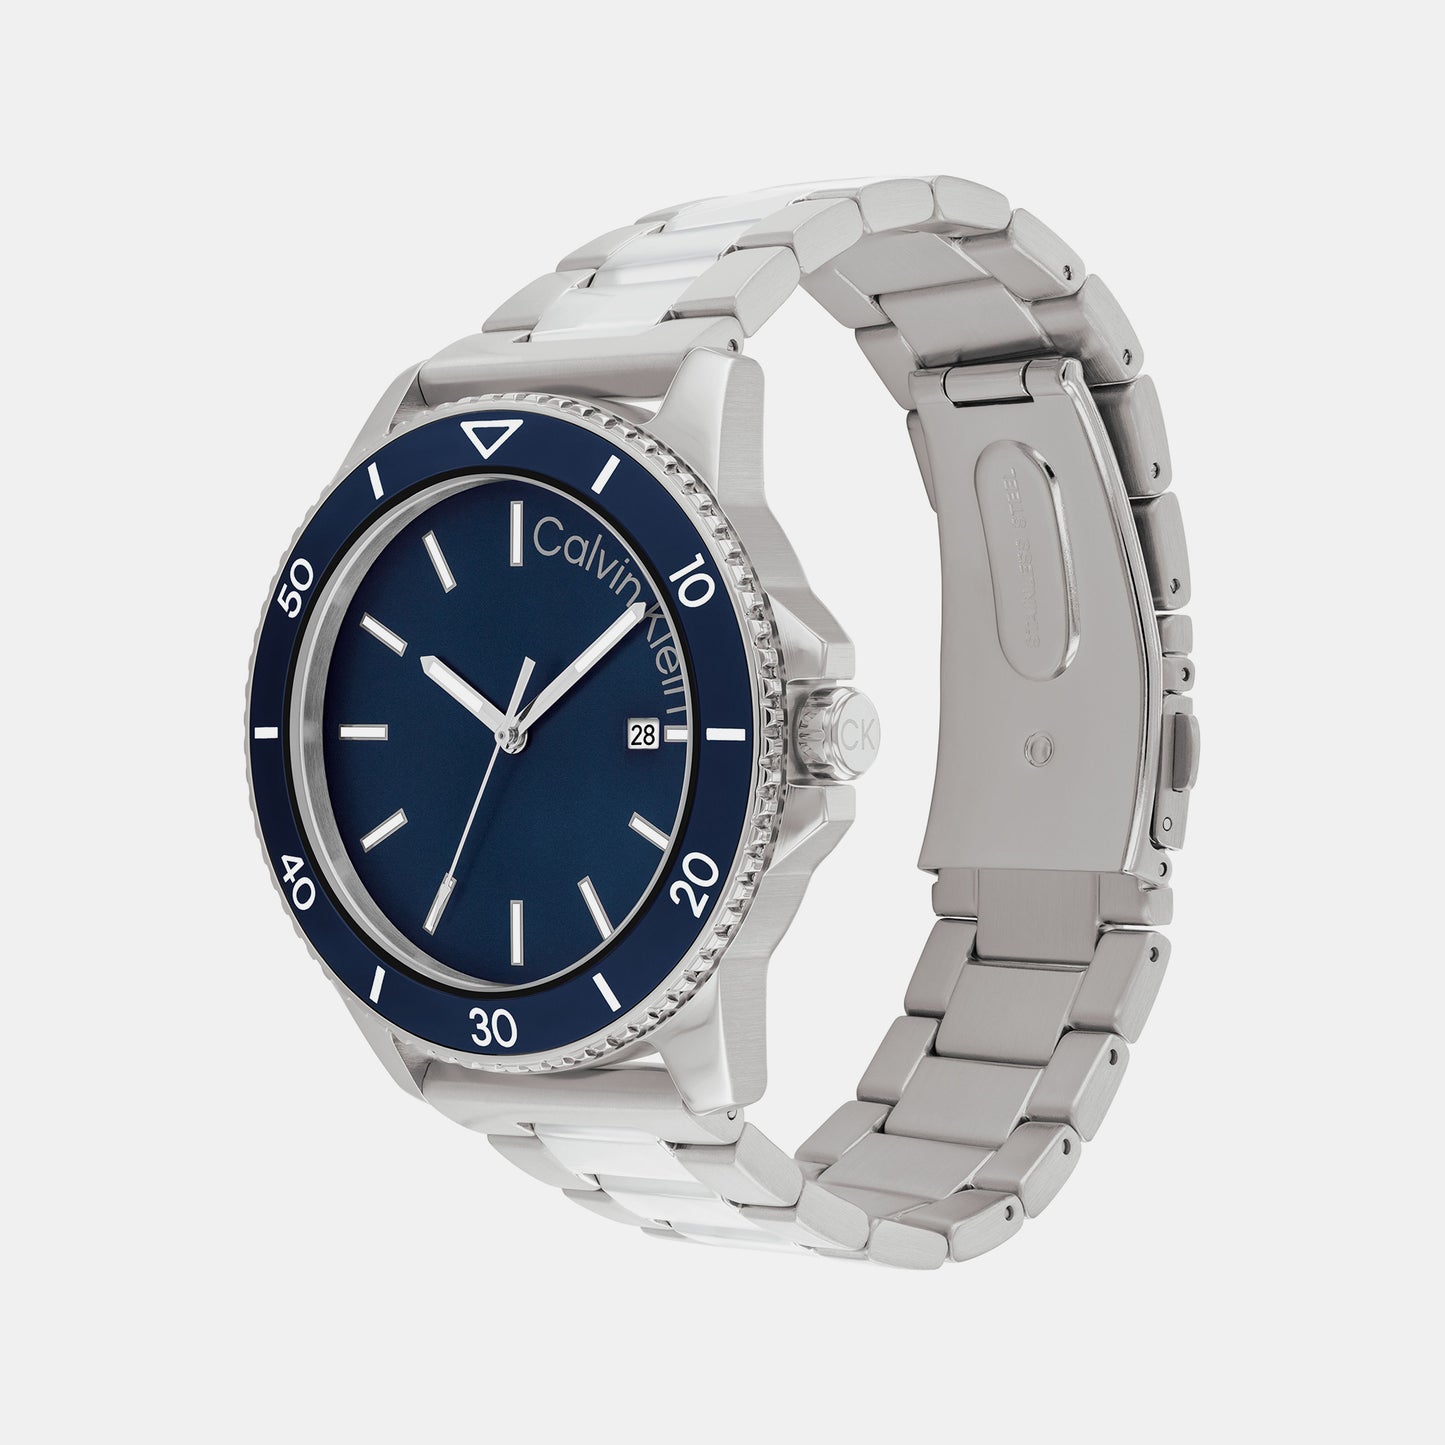 Aqueous Male Blue Analog Stainless Steel Watch 25200385